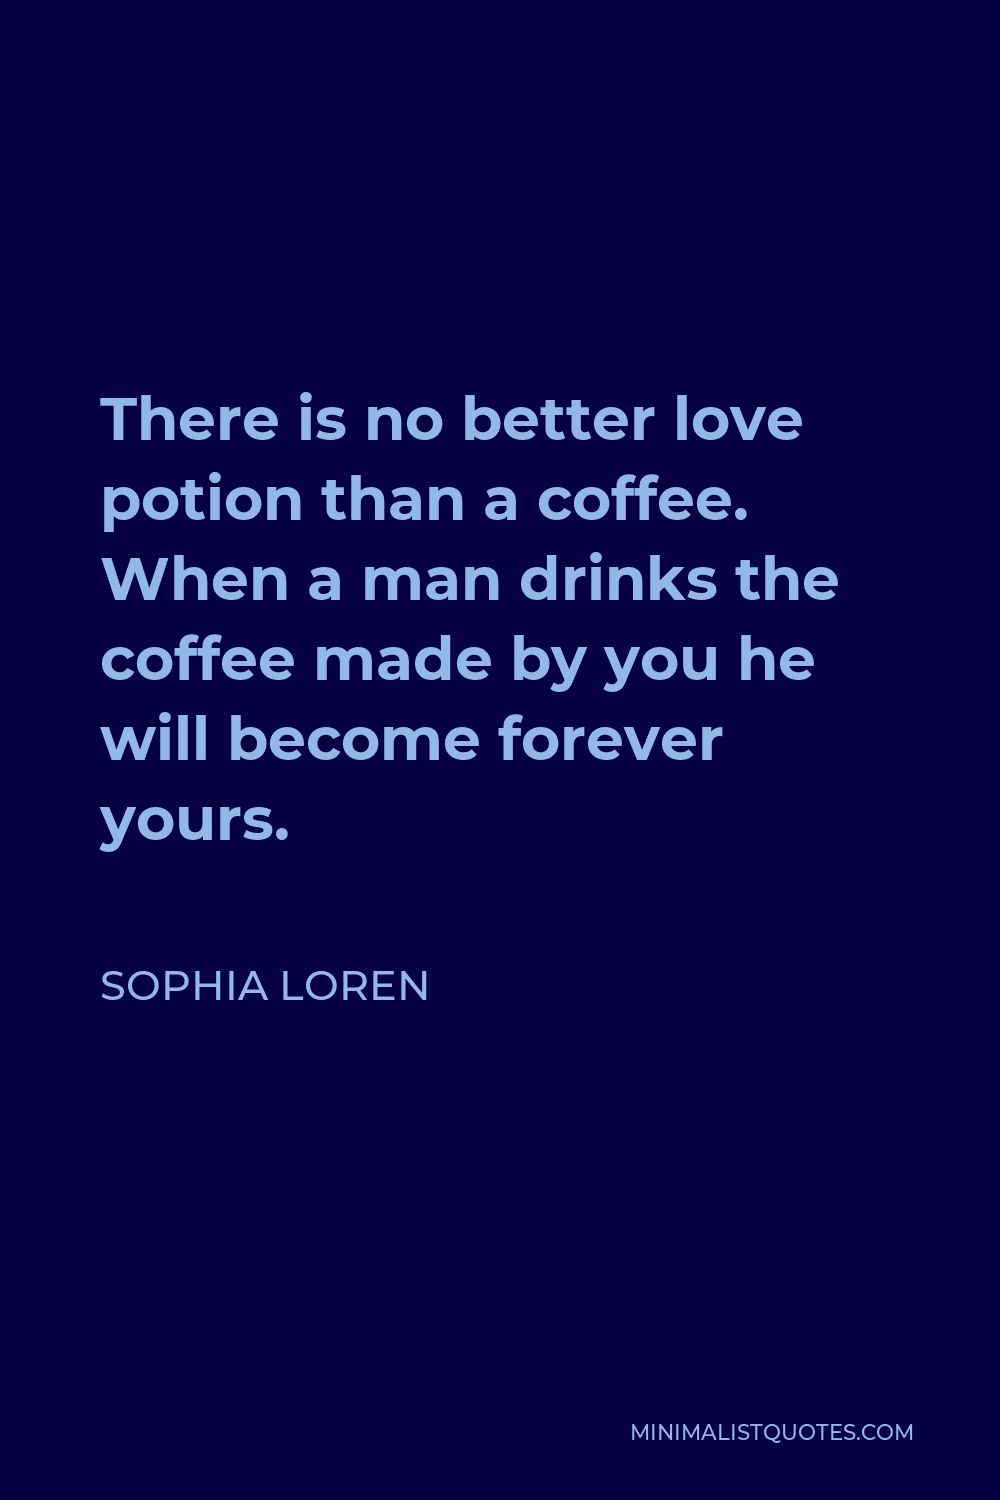 Sophia Loren Quote - There is no better love potion than a coffee. When a man drinks the coffee made by you he will become forever yours.